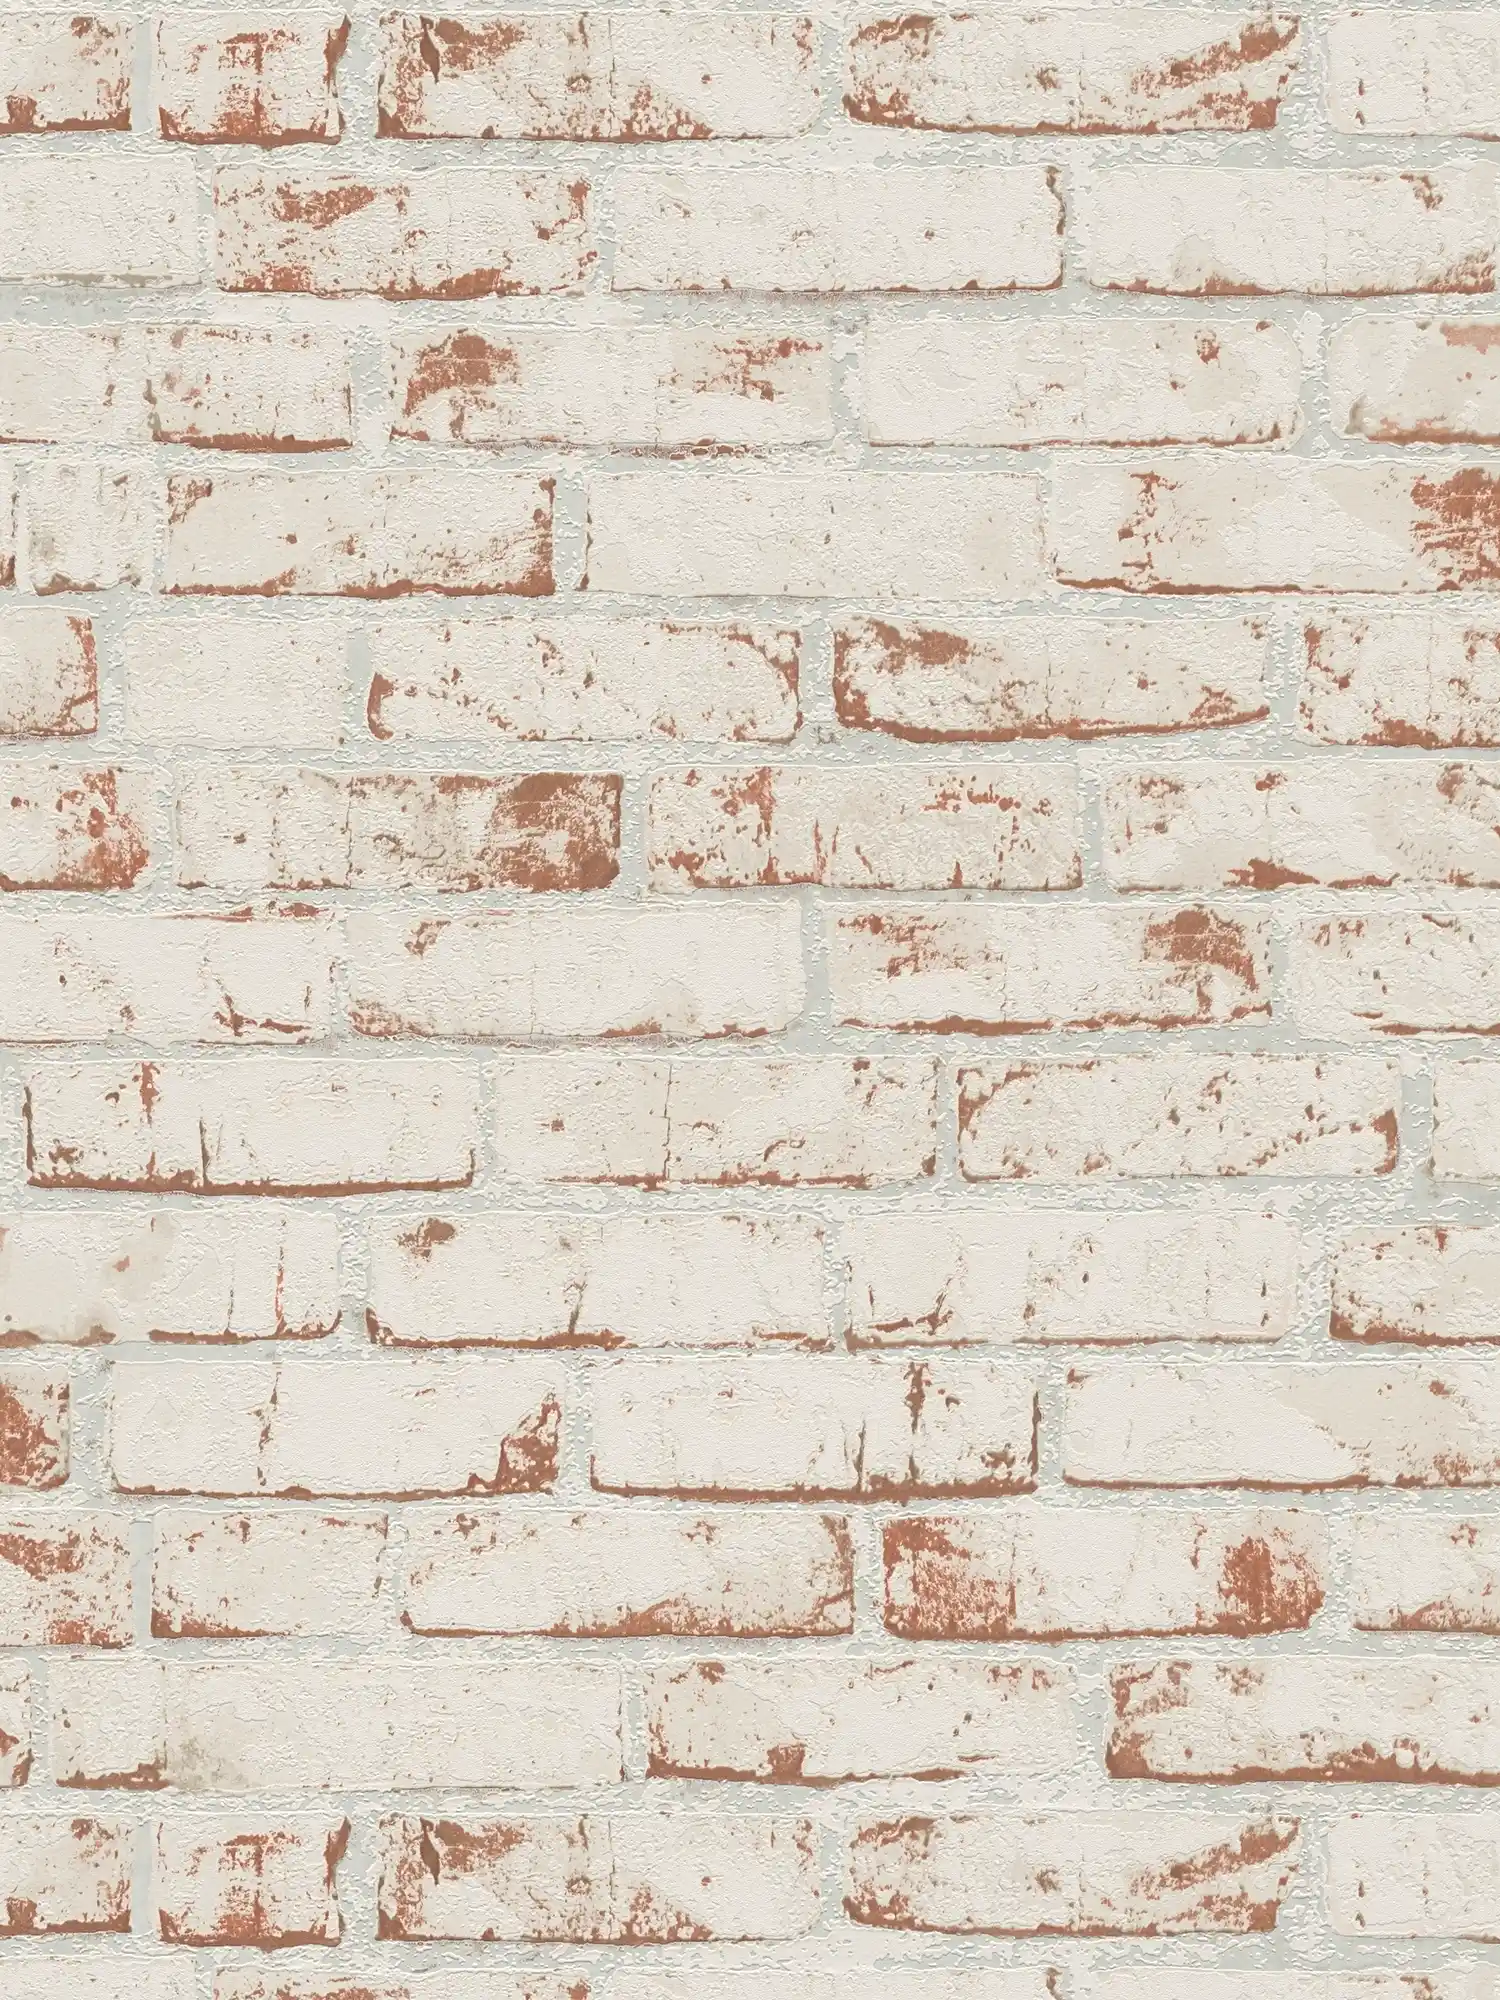 Stone optics wallpaper with rustic brick wall & 3D effect - red, brown, beige
